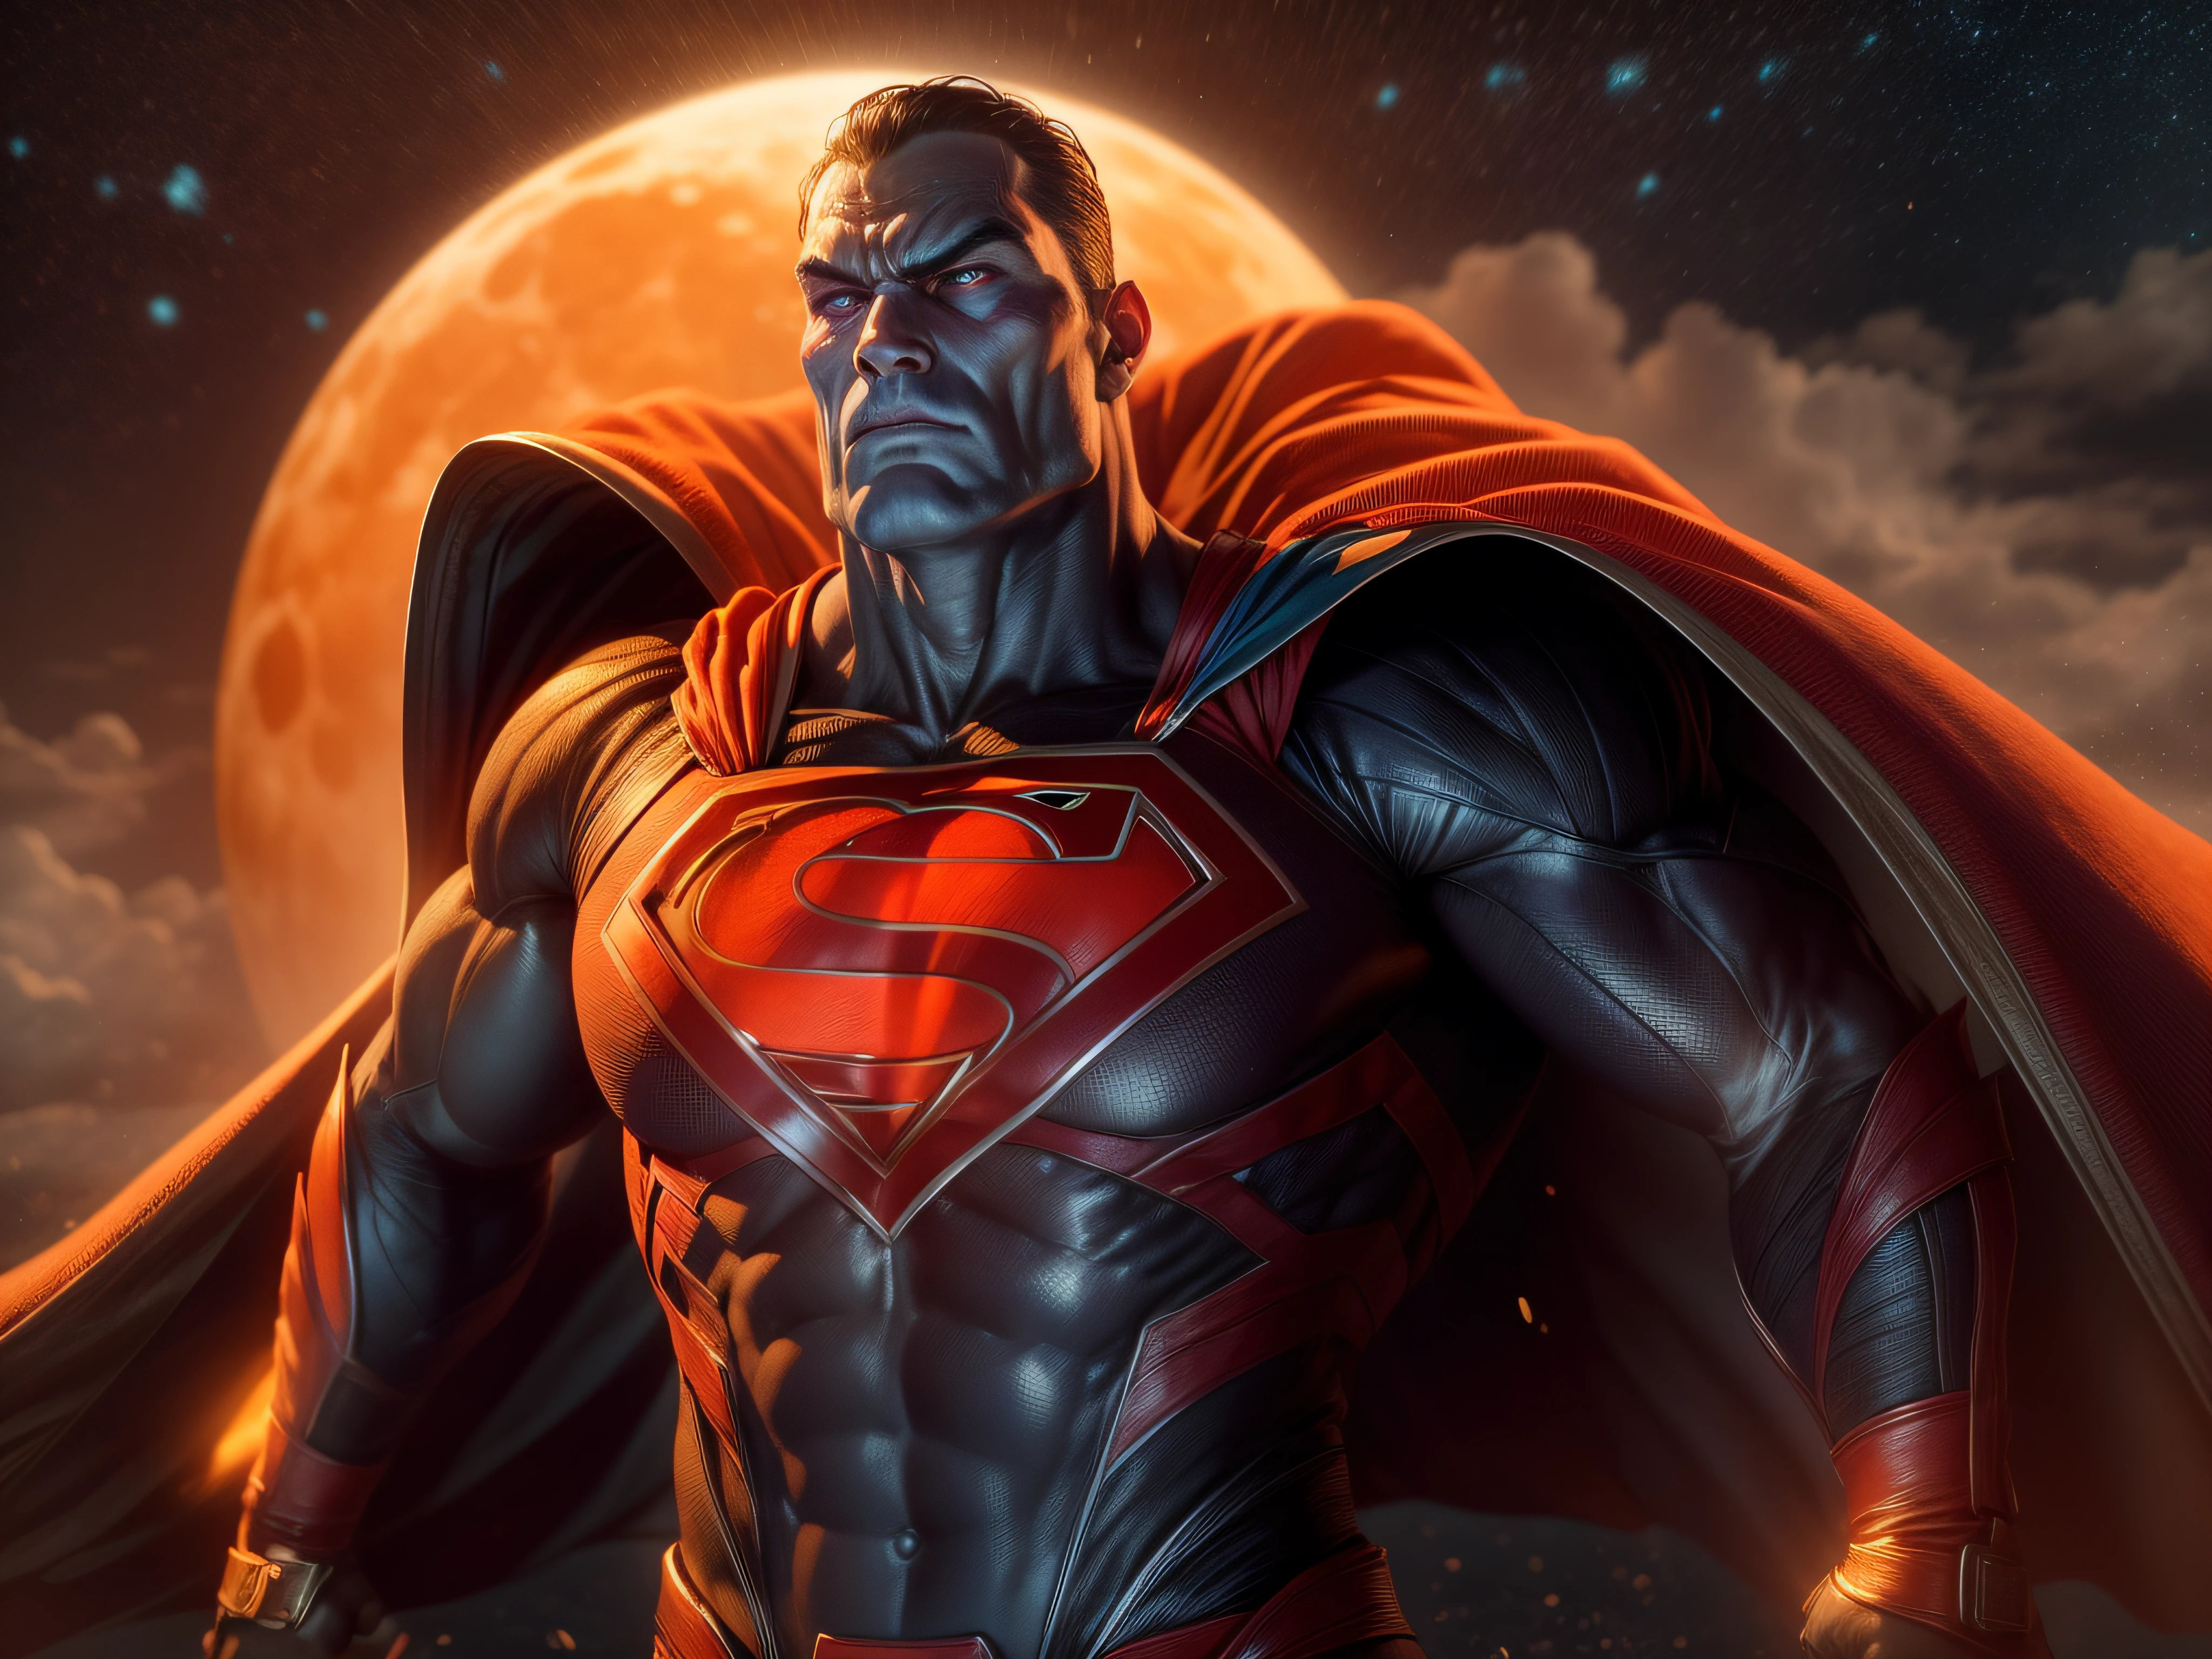 Close a powerful threat, The imposing appearance of the mighty Superman dressed in orange uniform, menacing stare, ricamente detalhado, Hiper realista, 3D-rendering, obra-prima, NVIDIA, RTX, ray-traced, Bokeh, Night sky with a huge and beautiful full moon, estrelas brilhando, 8k,